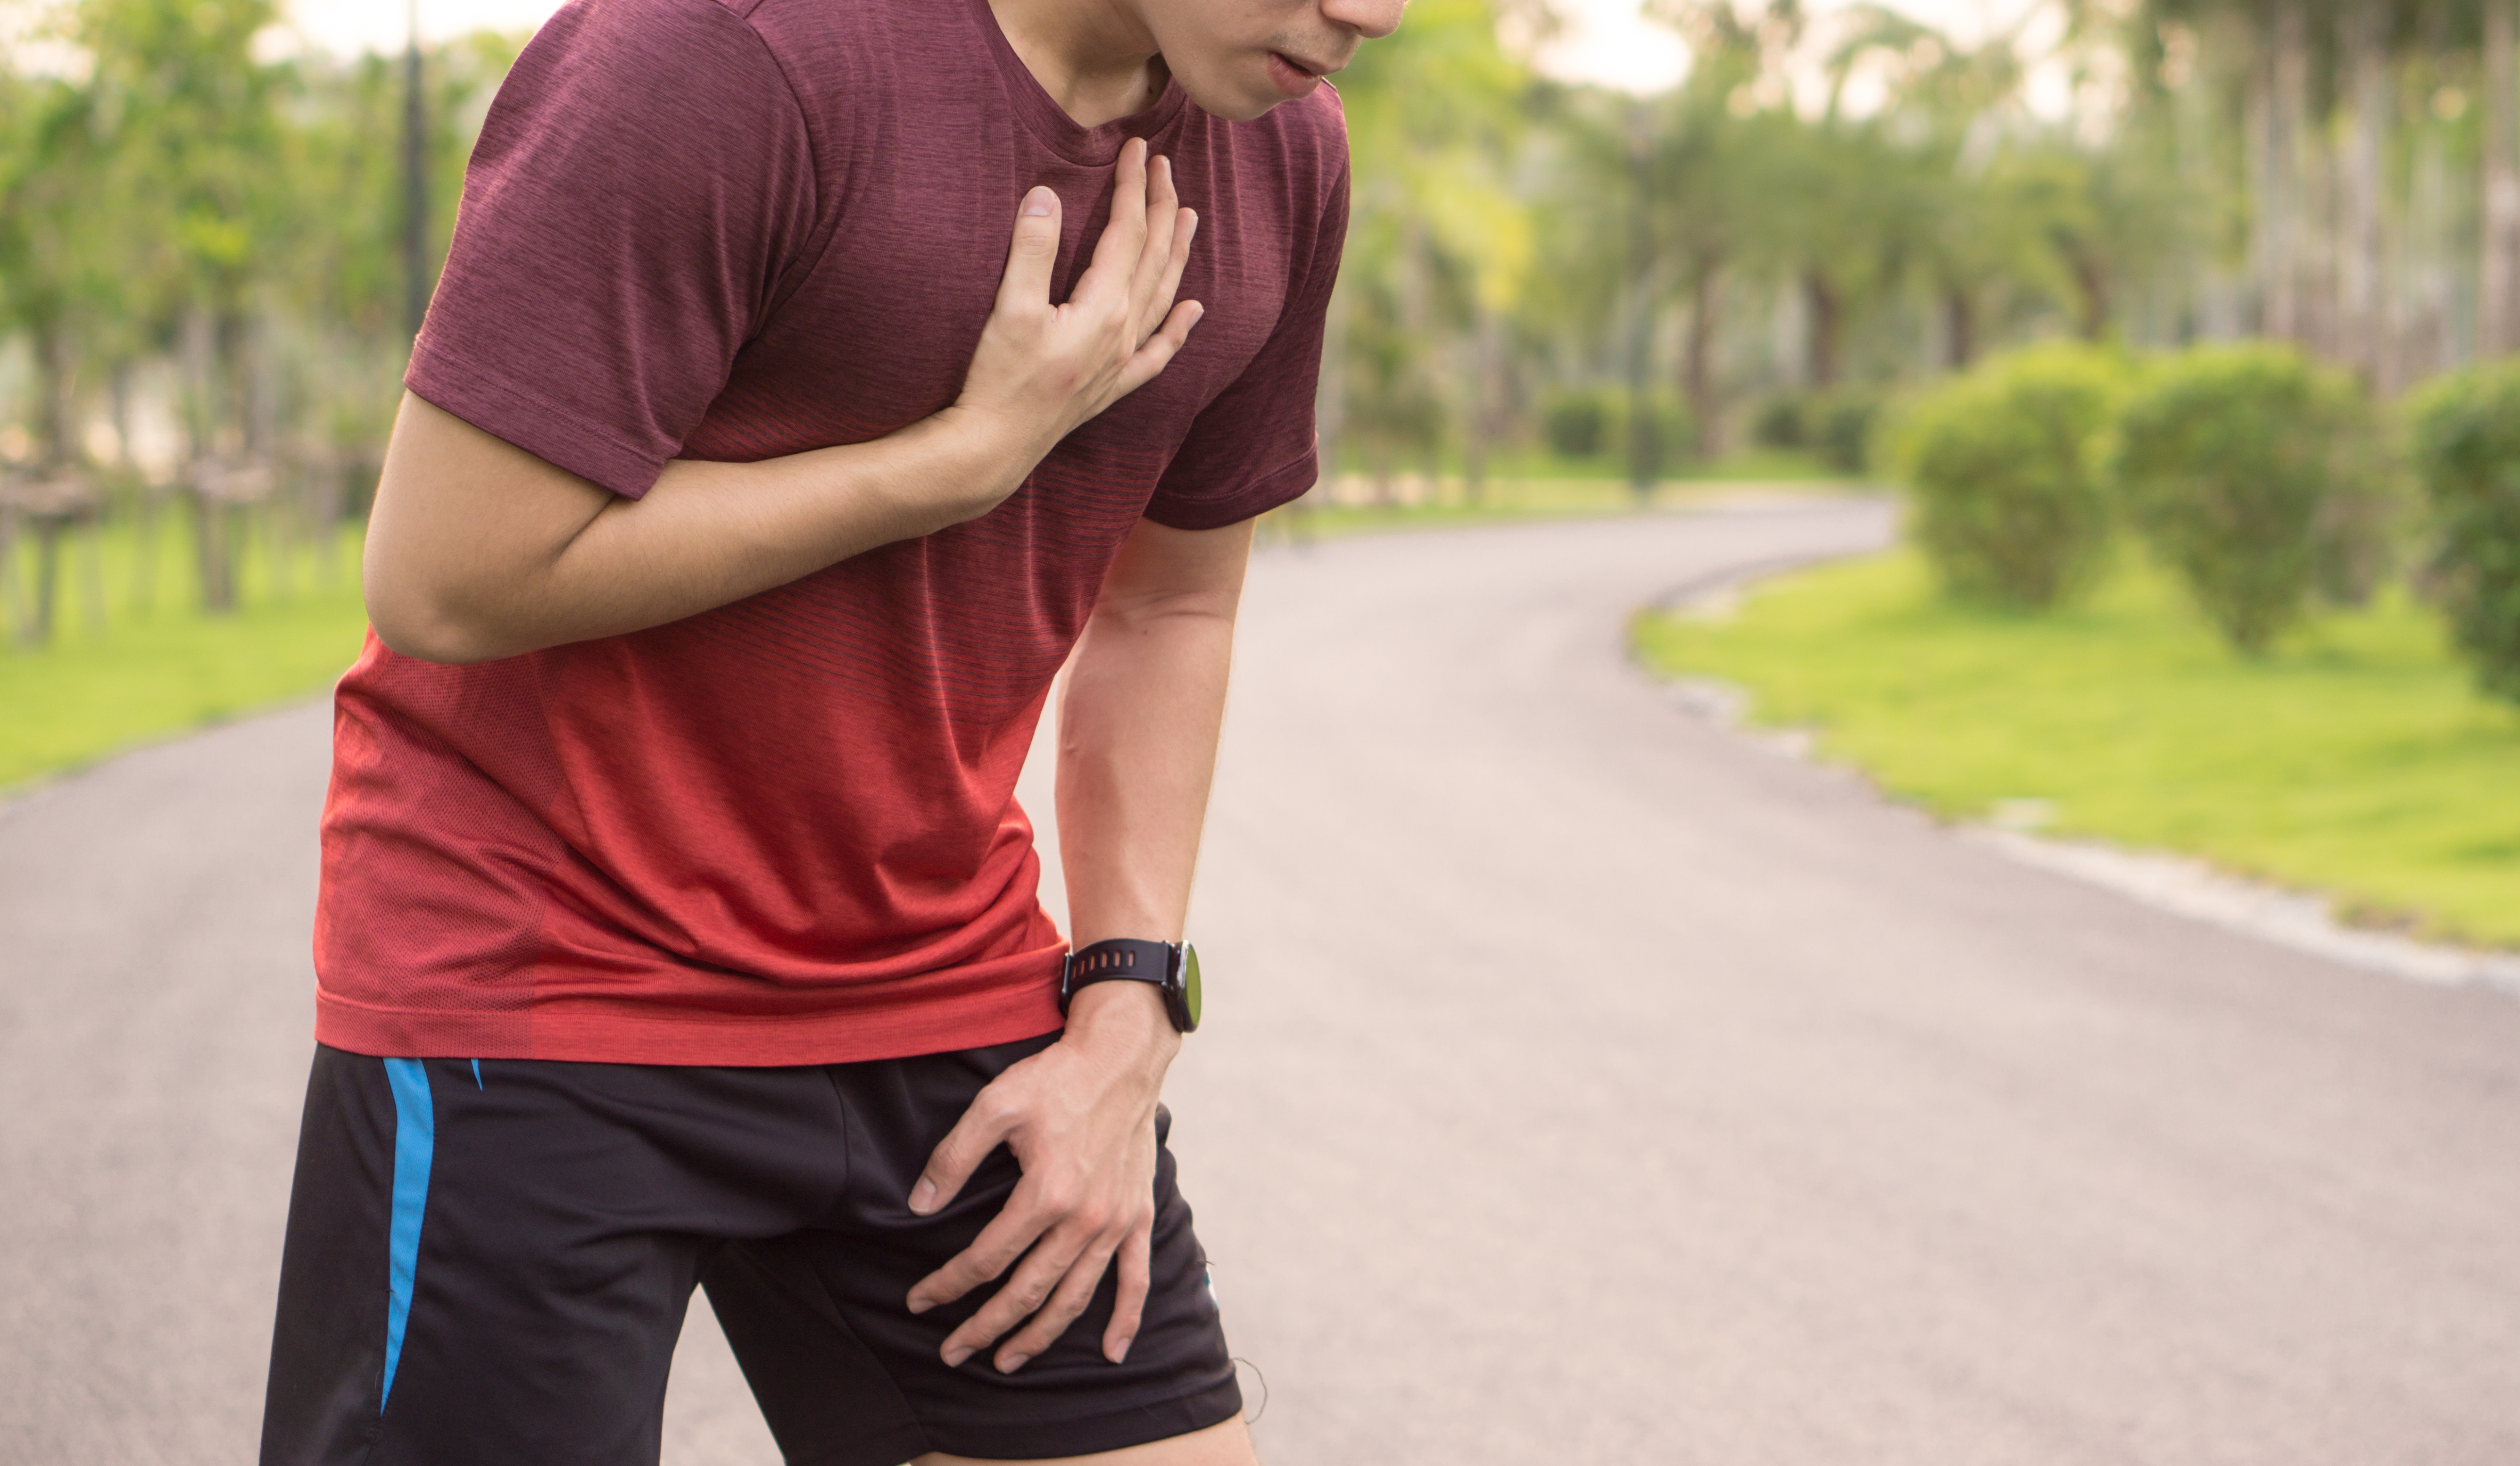 Can Exercise-Induced Acid Reflux Cause LPR?